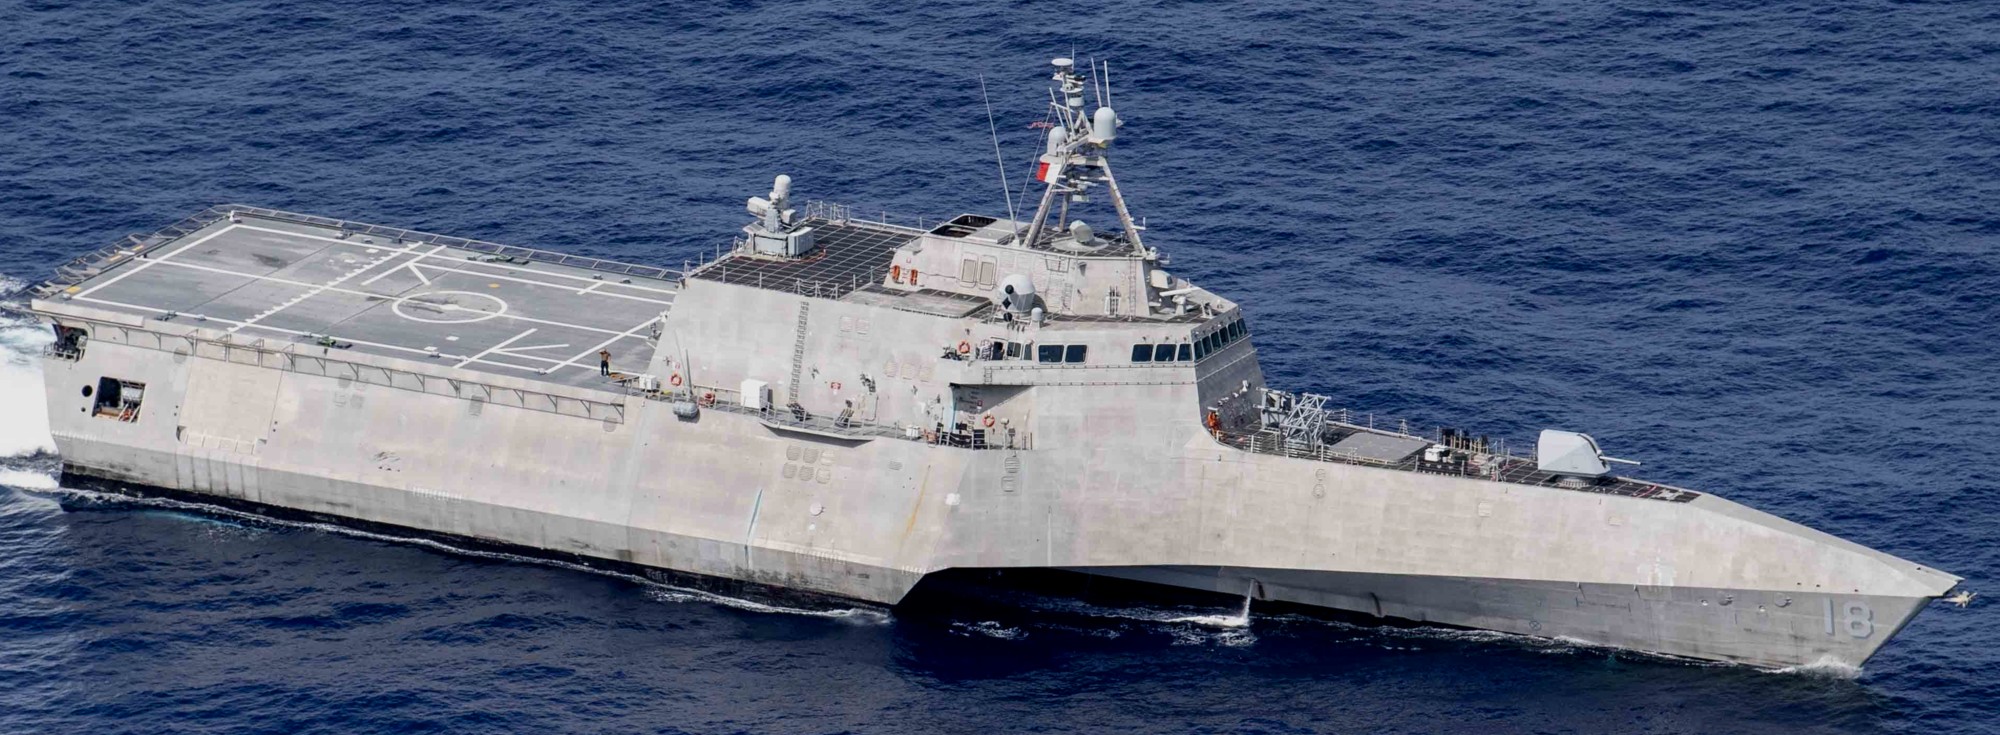 lcs-18 uss charleston independence class littoral combat ship us navy 23